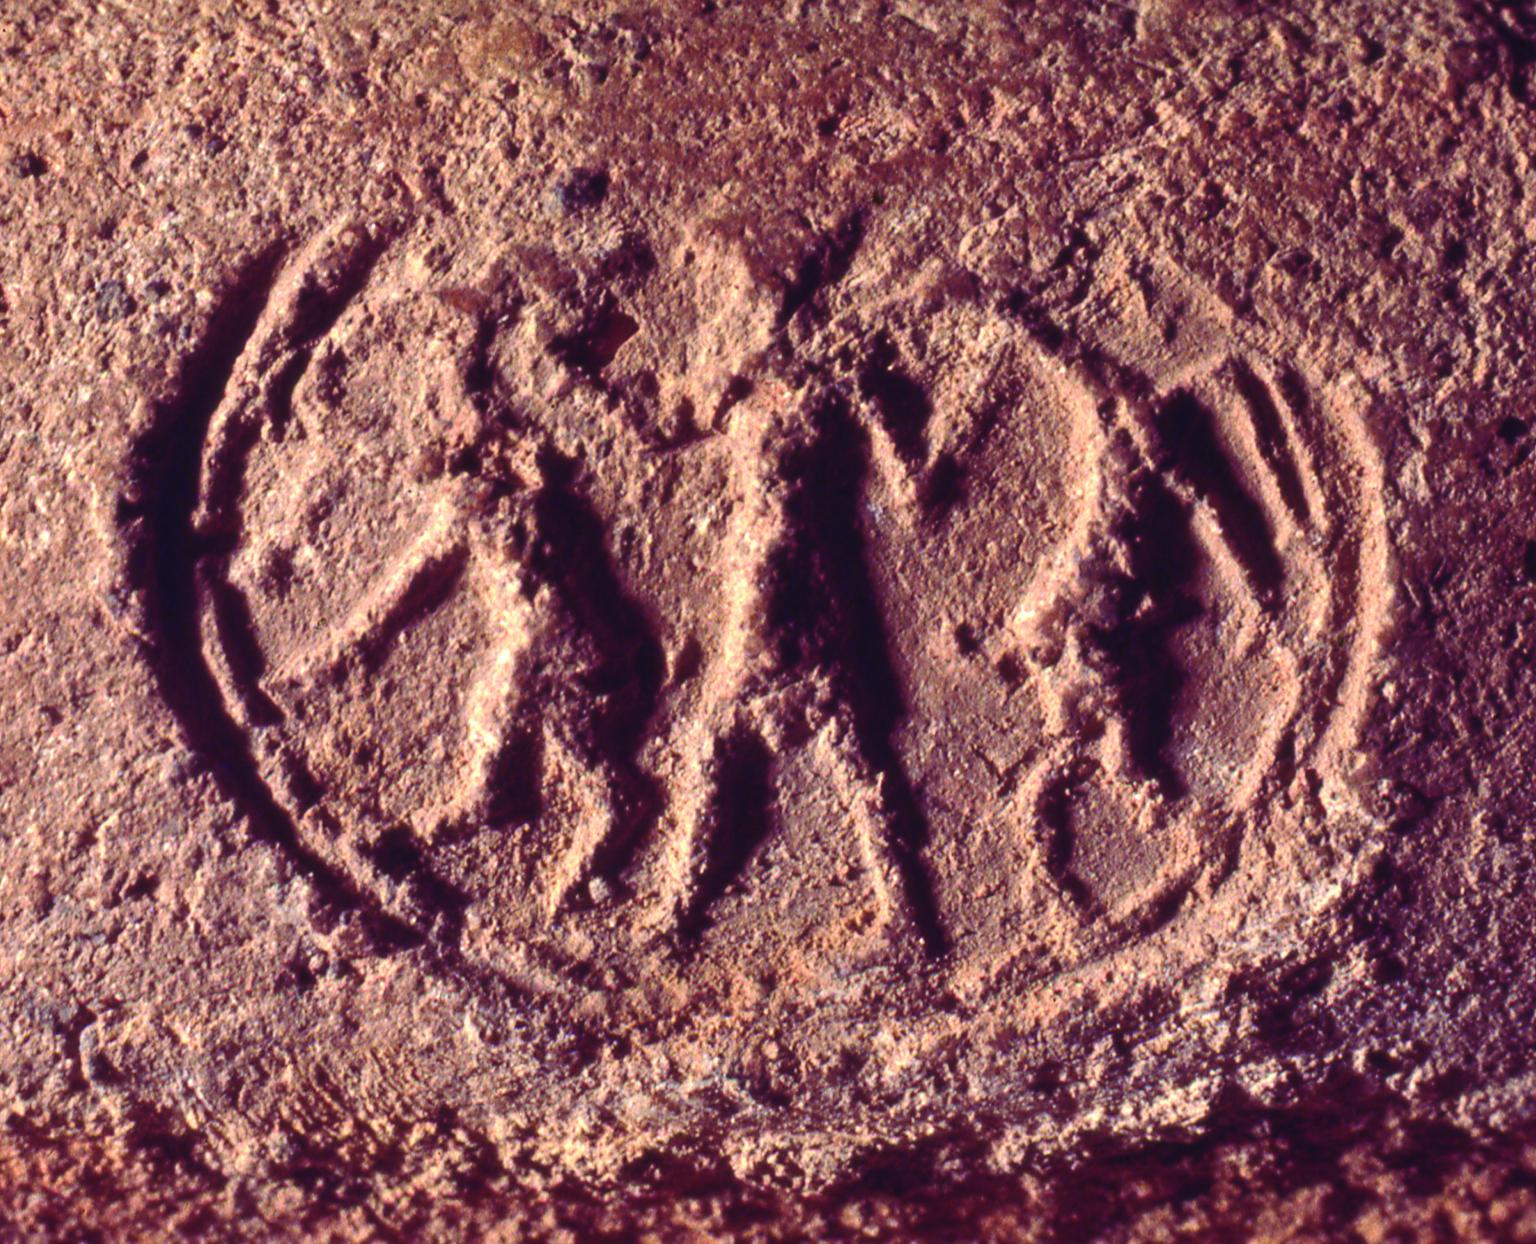 Seal impression with figure holding two ibex-like animals.